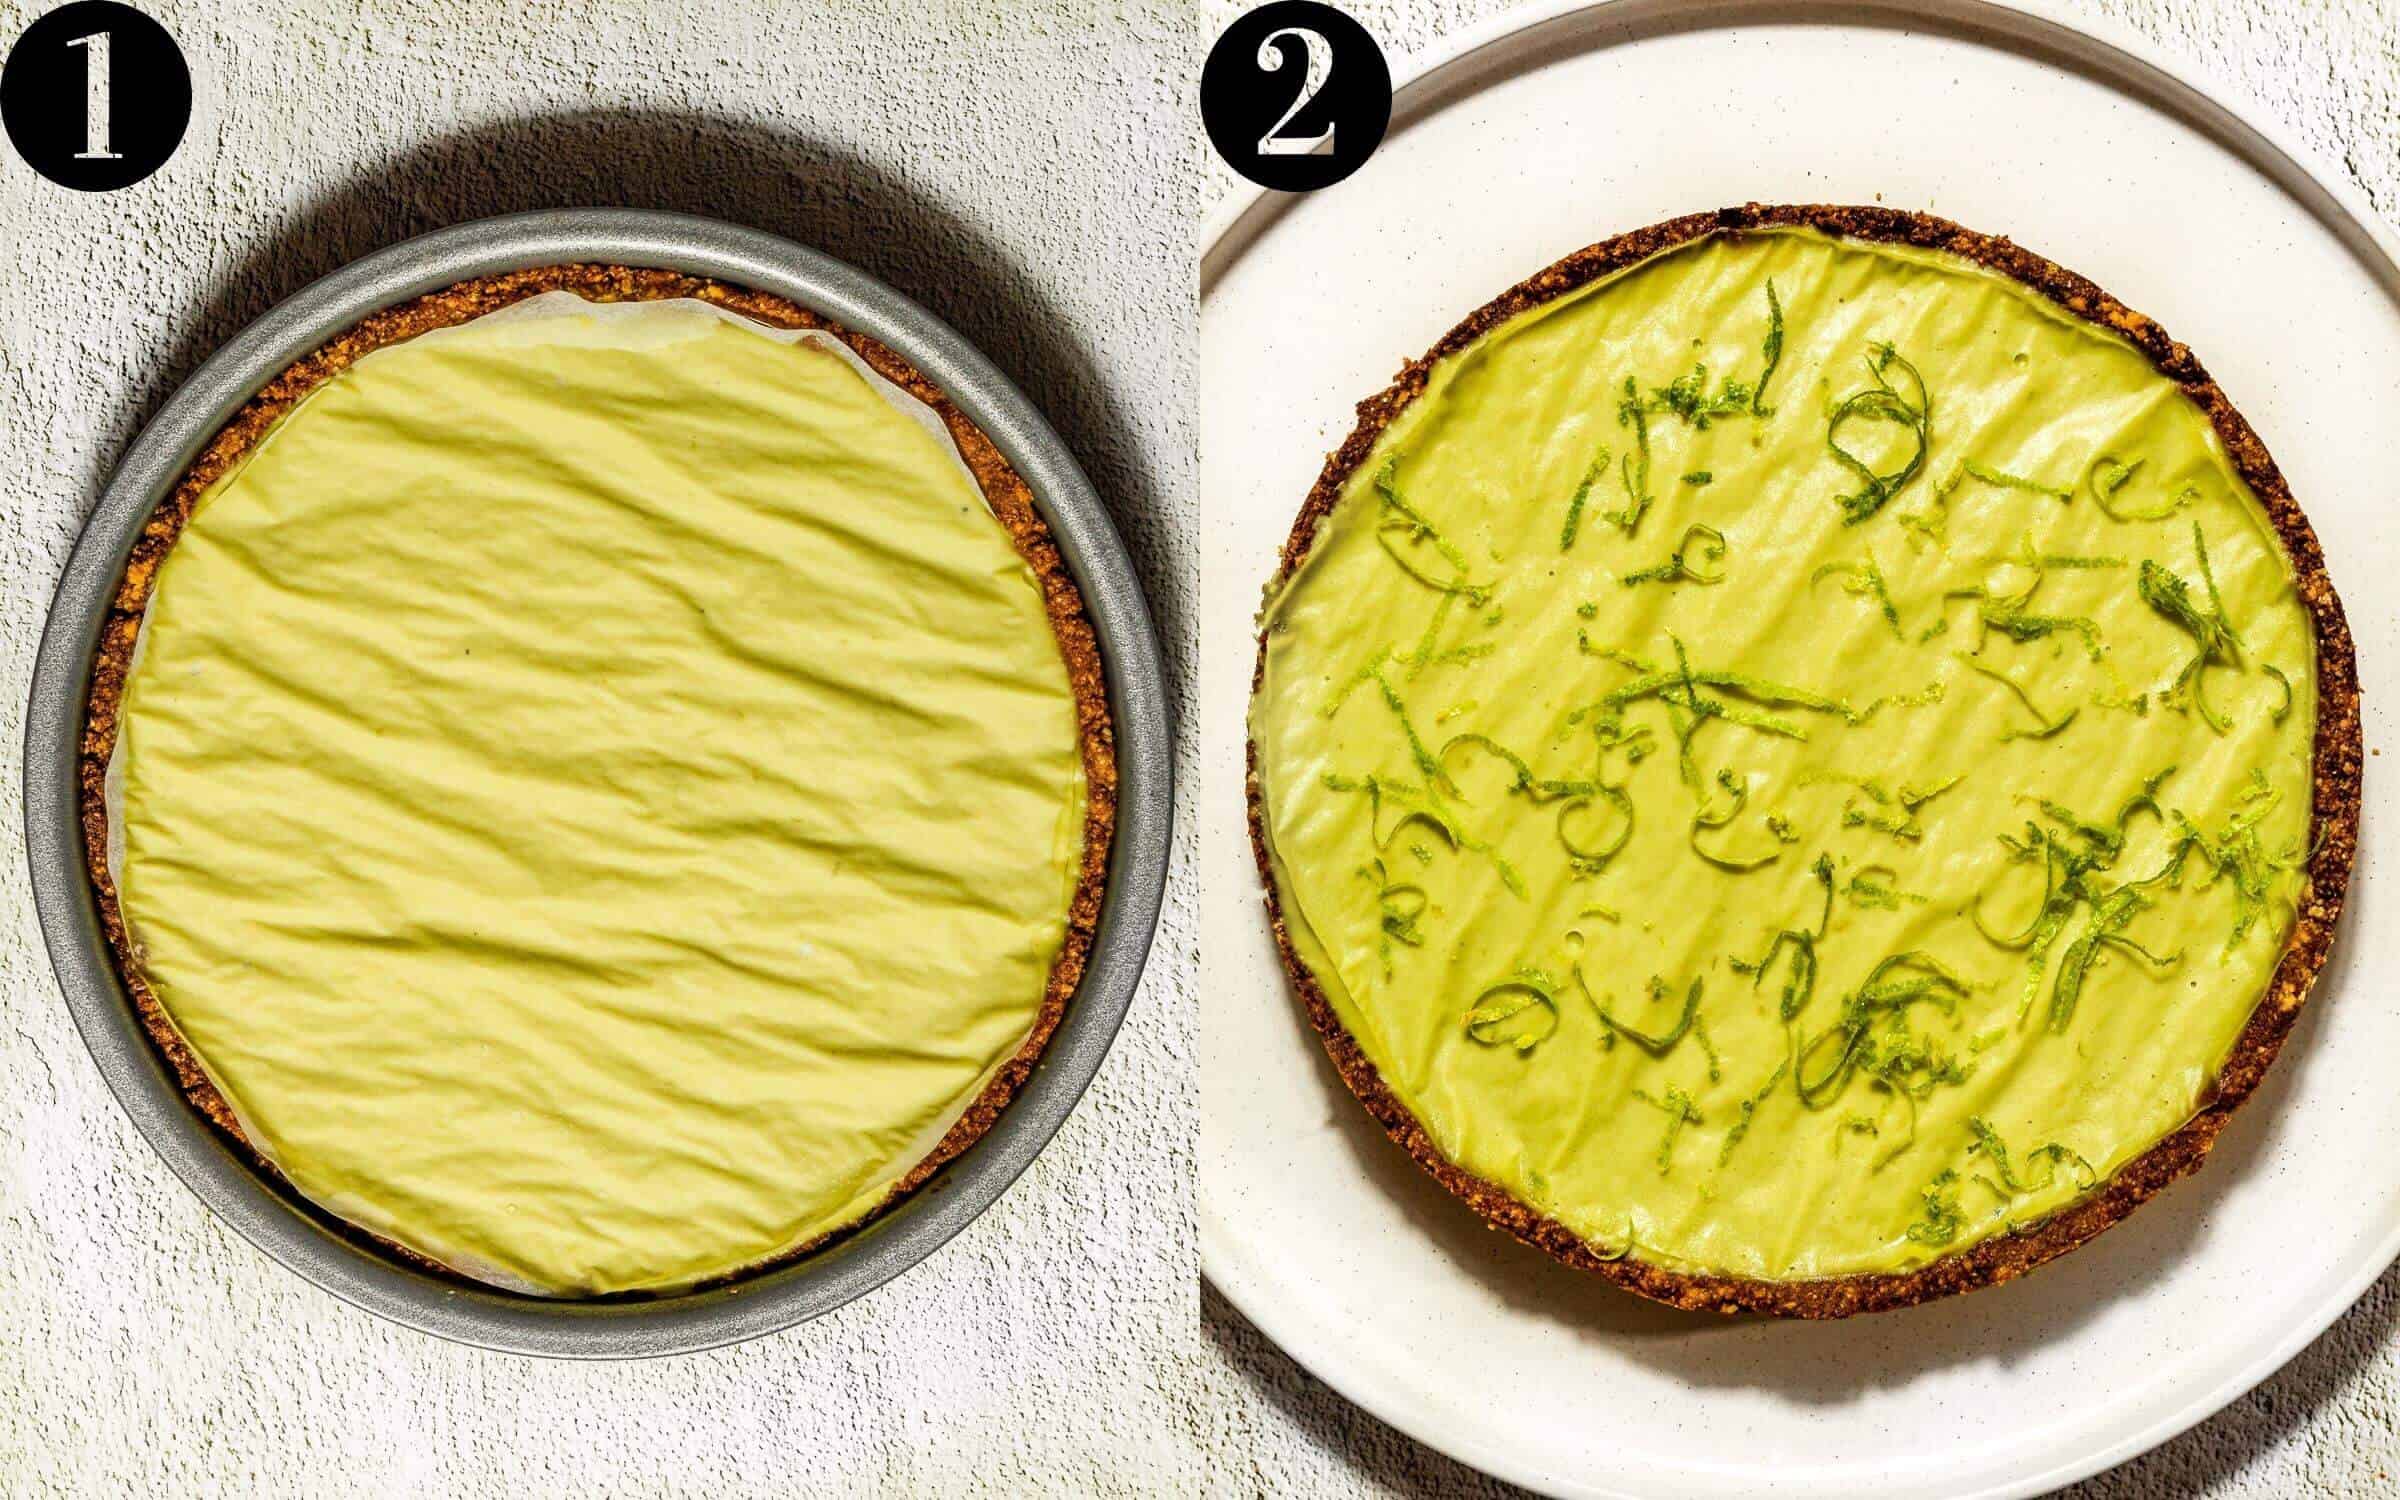 Putting a vegan key lime pie together. 1 - Cover with parchment paper or clingfilm. 2 - Top with lime zest